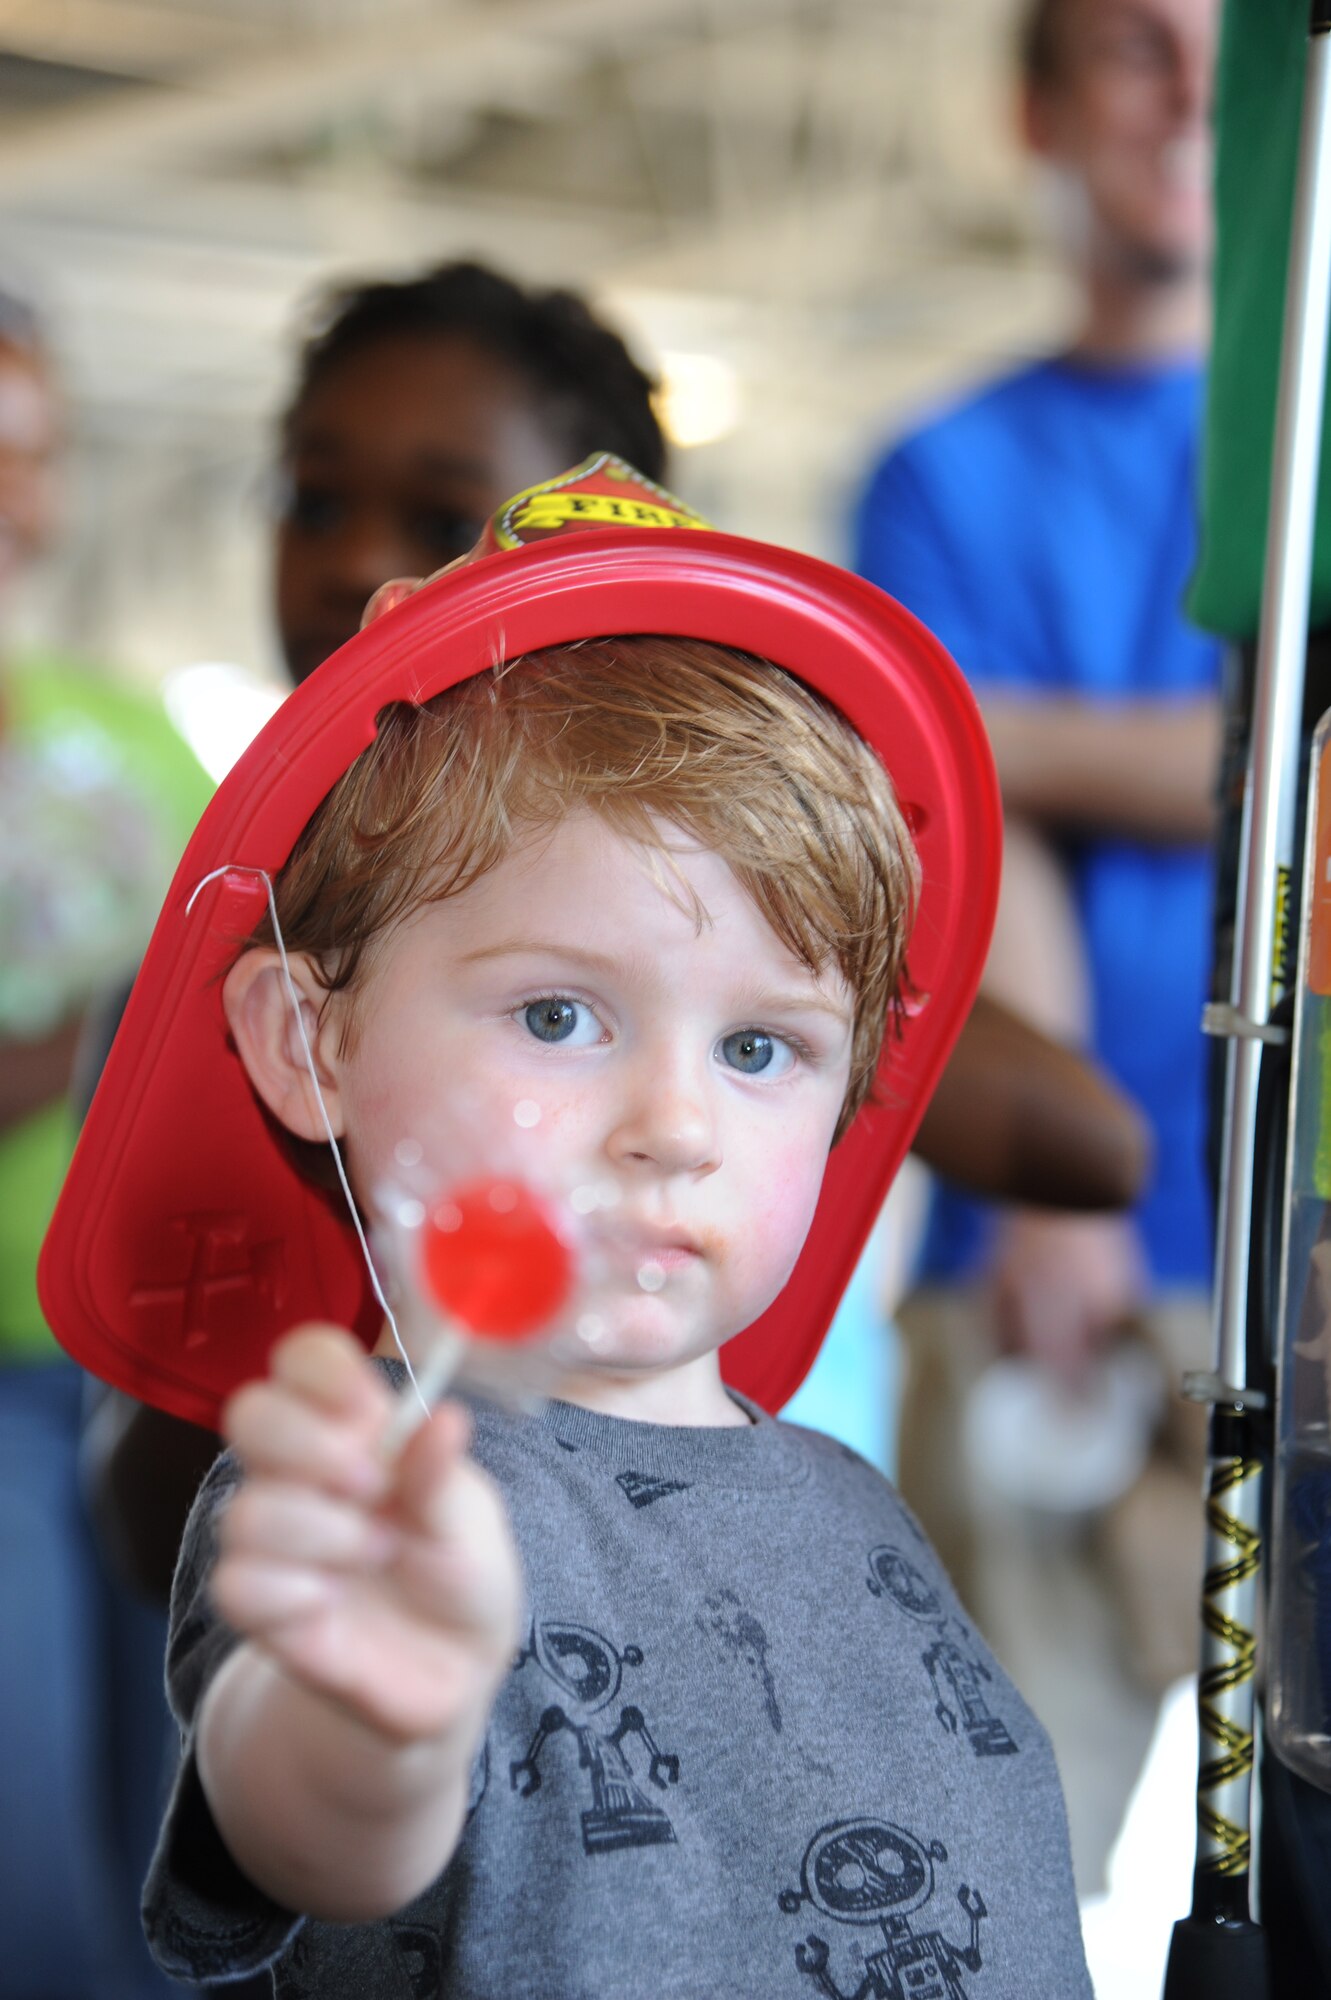 Two-year-old Noble Gagnon, son of Tech. Sgt. Geoffrey Gagnon, 81st Training Support Squadron, and Staff Sgt. Christina Gagnon, 81st Medical Group, displays his lollipop while wearing a firefighter hat during the Keesler Fire Department’s open house Oct. 13, 2012, Keesler Air Force Base, Miss.  The event was held on the final day of fire prevention week during which the fire department conducted random fire drills throughout the base, toured various facilities with Sparky the Fire Dog, passed out fire safety handouts and fire hats for children and provided stove and fire extinguisher demonstrations.  (U.S. Air Force photo by Kemberly Groue)